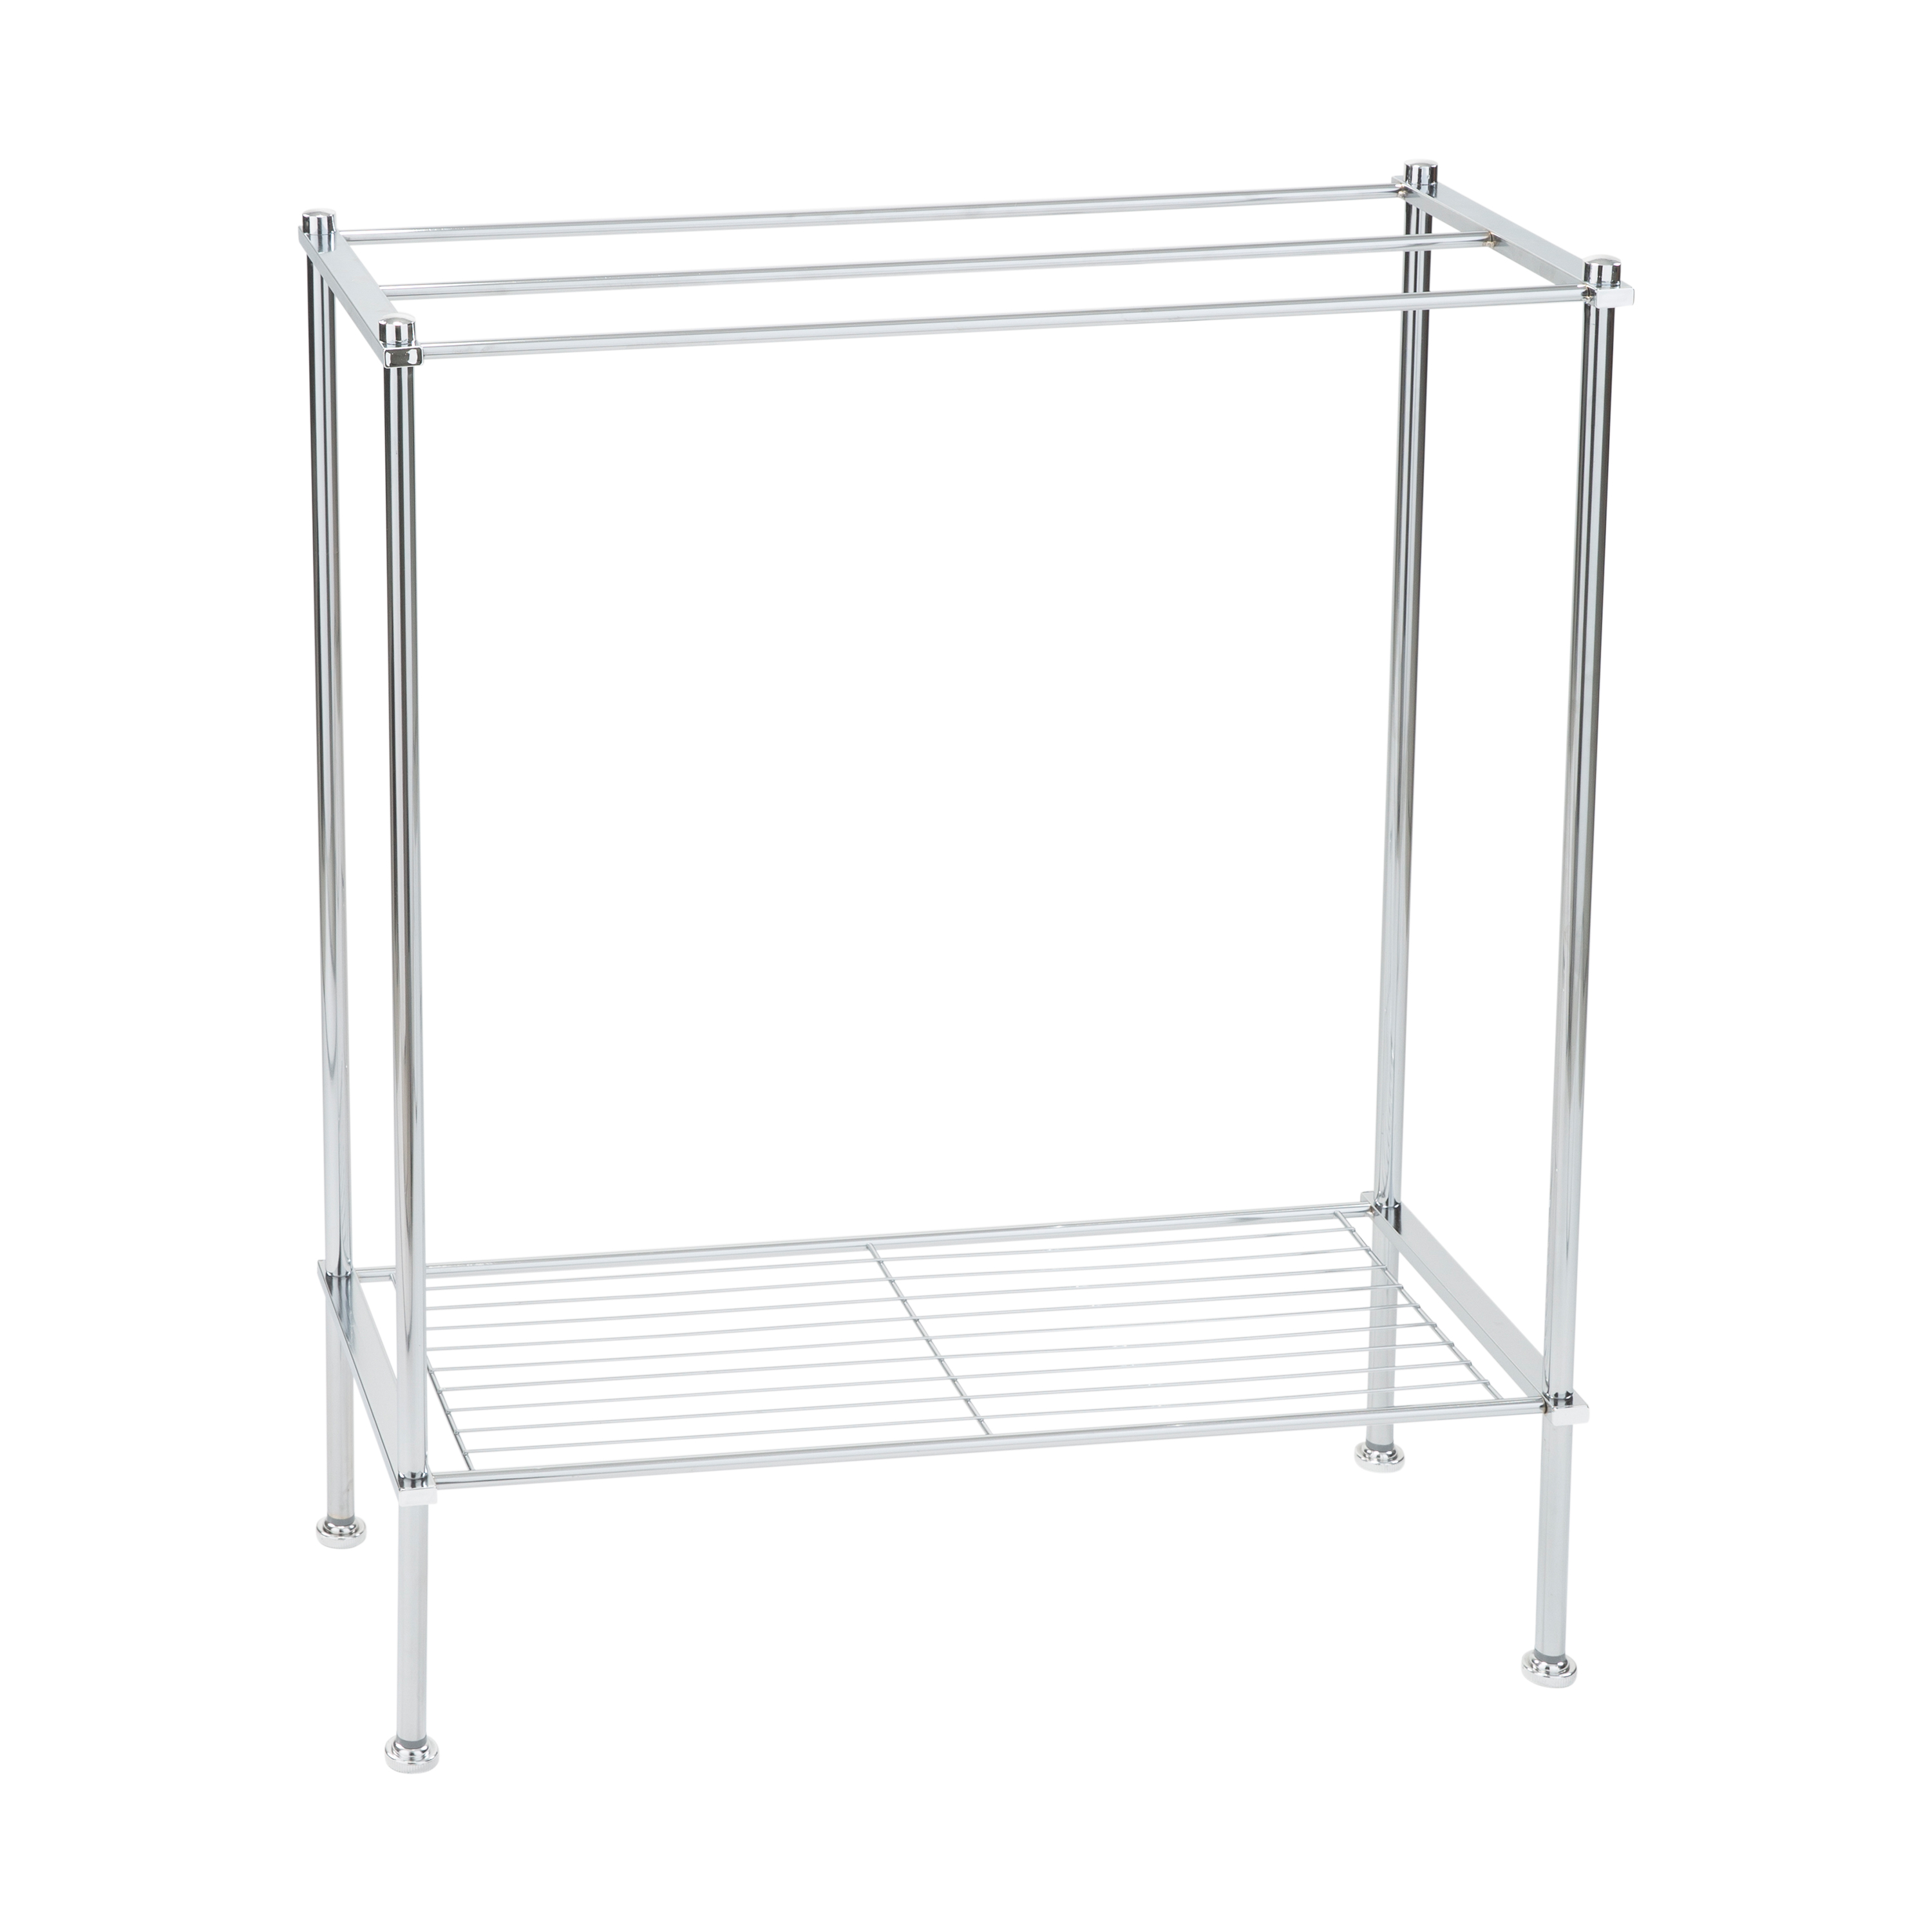 Organize It All Freestanding Metal Towel Rack in Chrome - image 1 of 7